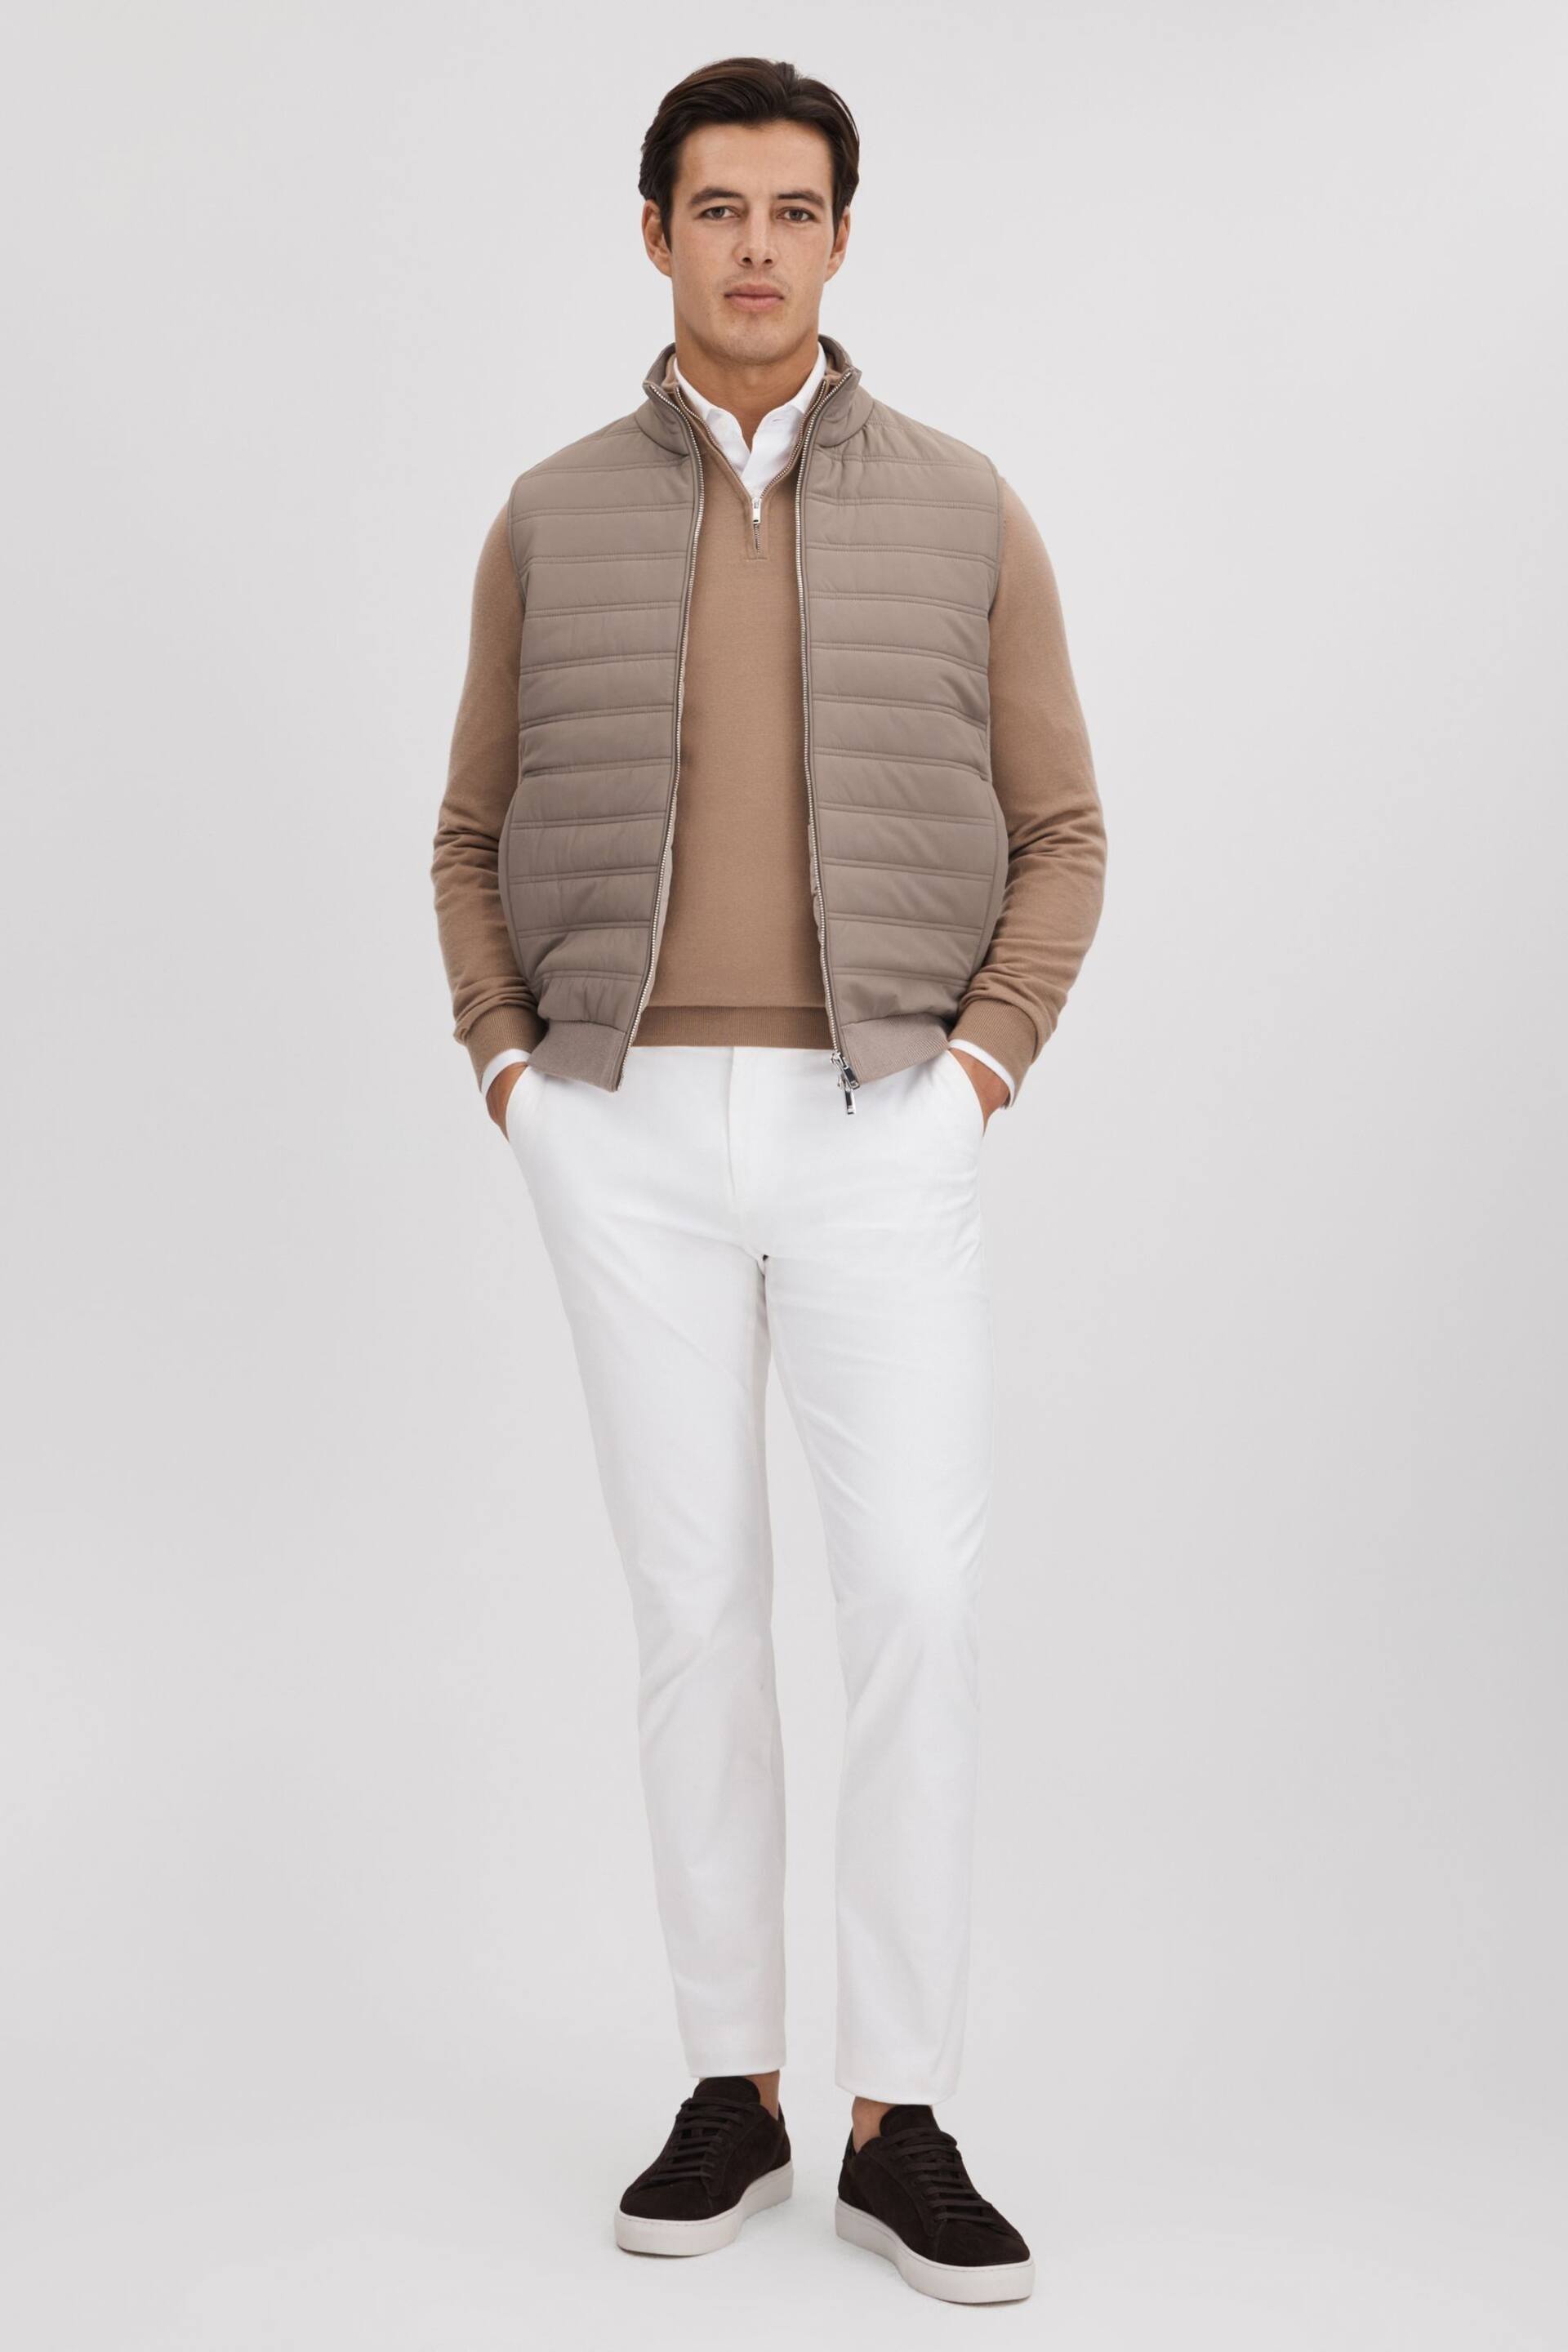 Reiss Mink Cranford Hybrid Quilt and Knit Zip-Through Gilet - Image 3 of 6